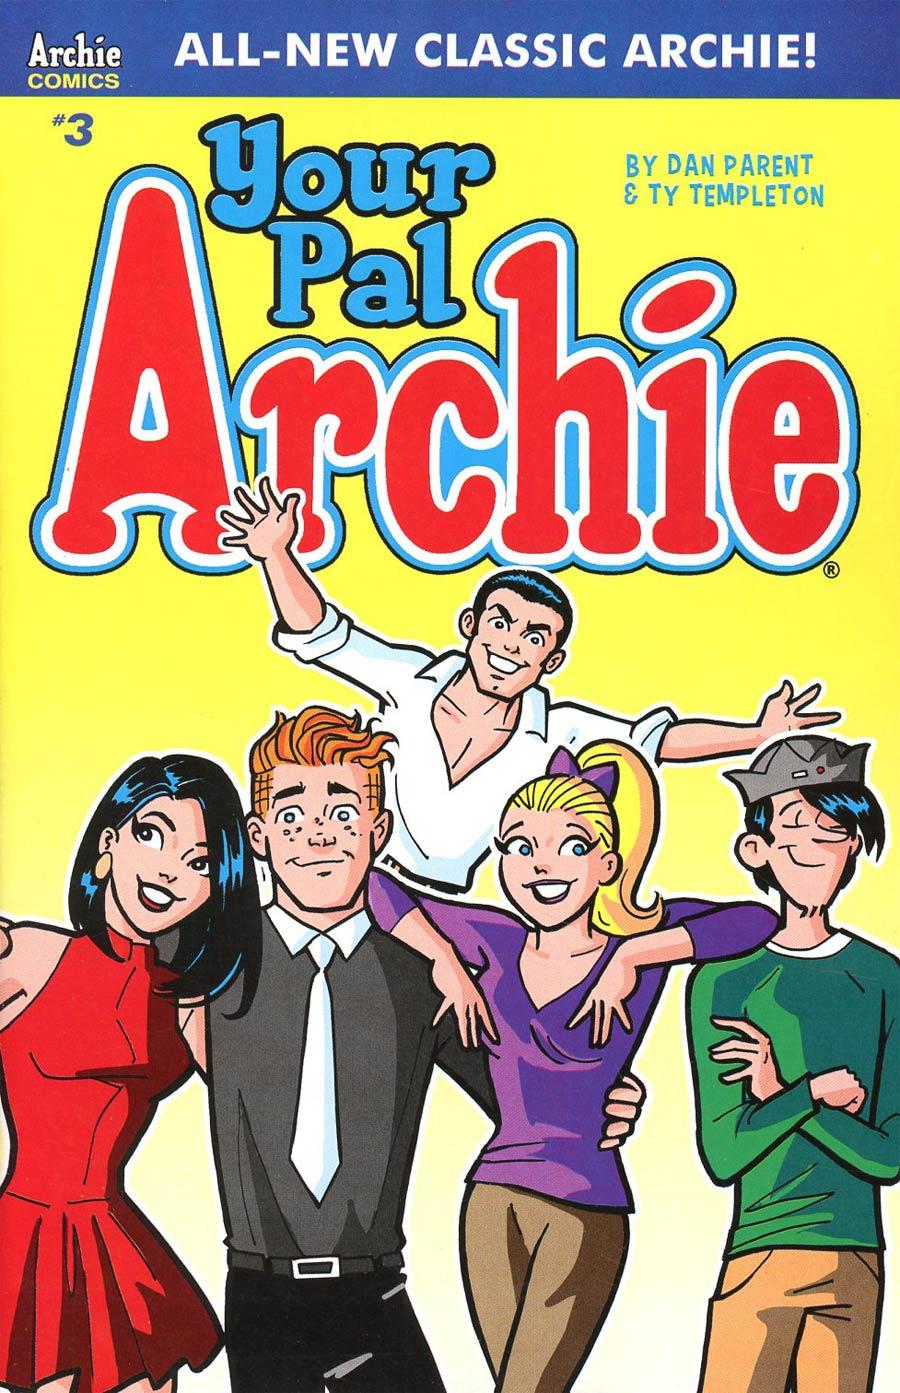 All-New Classic Archie Your Pal Archie Vol. 1 #3